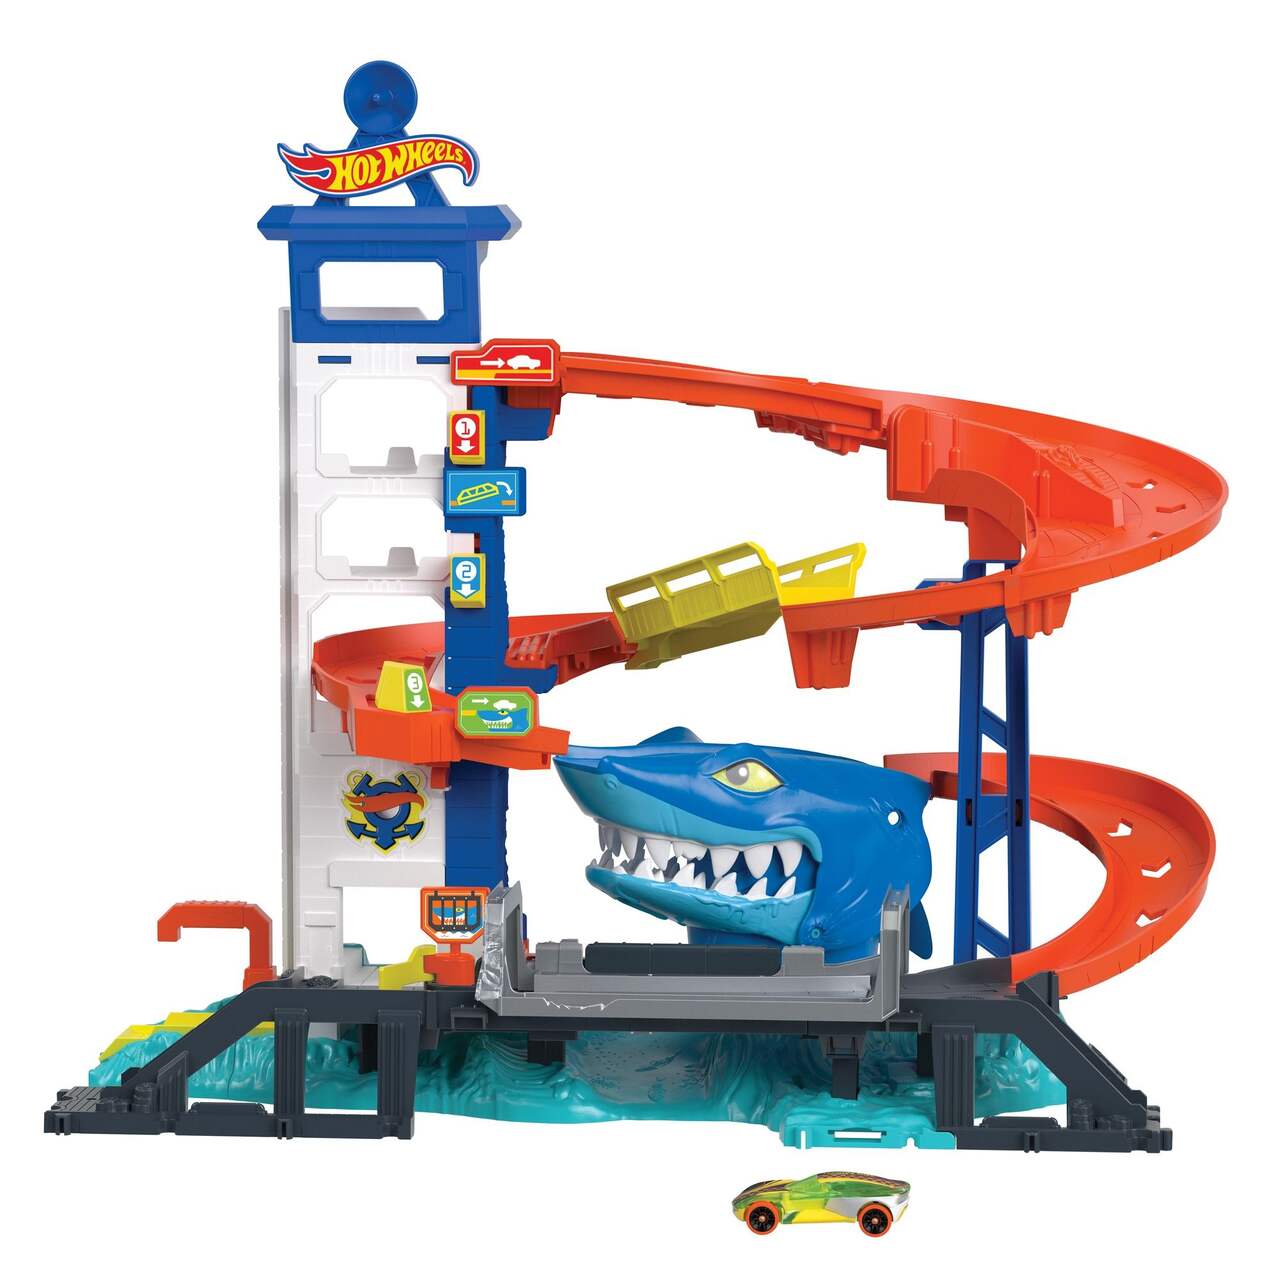 https://media-www.canadiantire.ca/product/seasonal-gardening/toys/toys-games/0509494/hot-wheels-city-shark-strike-rescue-e2e6a747-a3a1-4a38-824d-cc21207c837e-jpgrendition.jpg?imdensity=1&imwidth=640&impolicy=mZoom